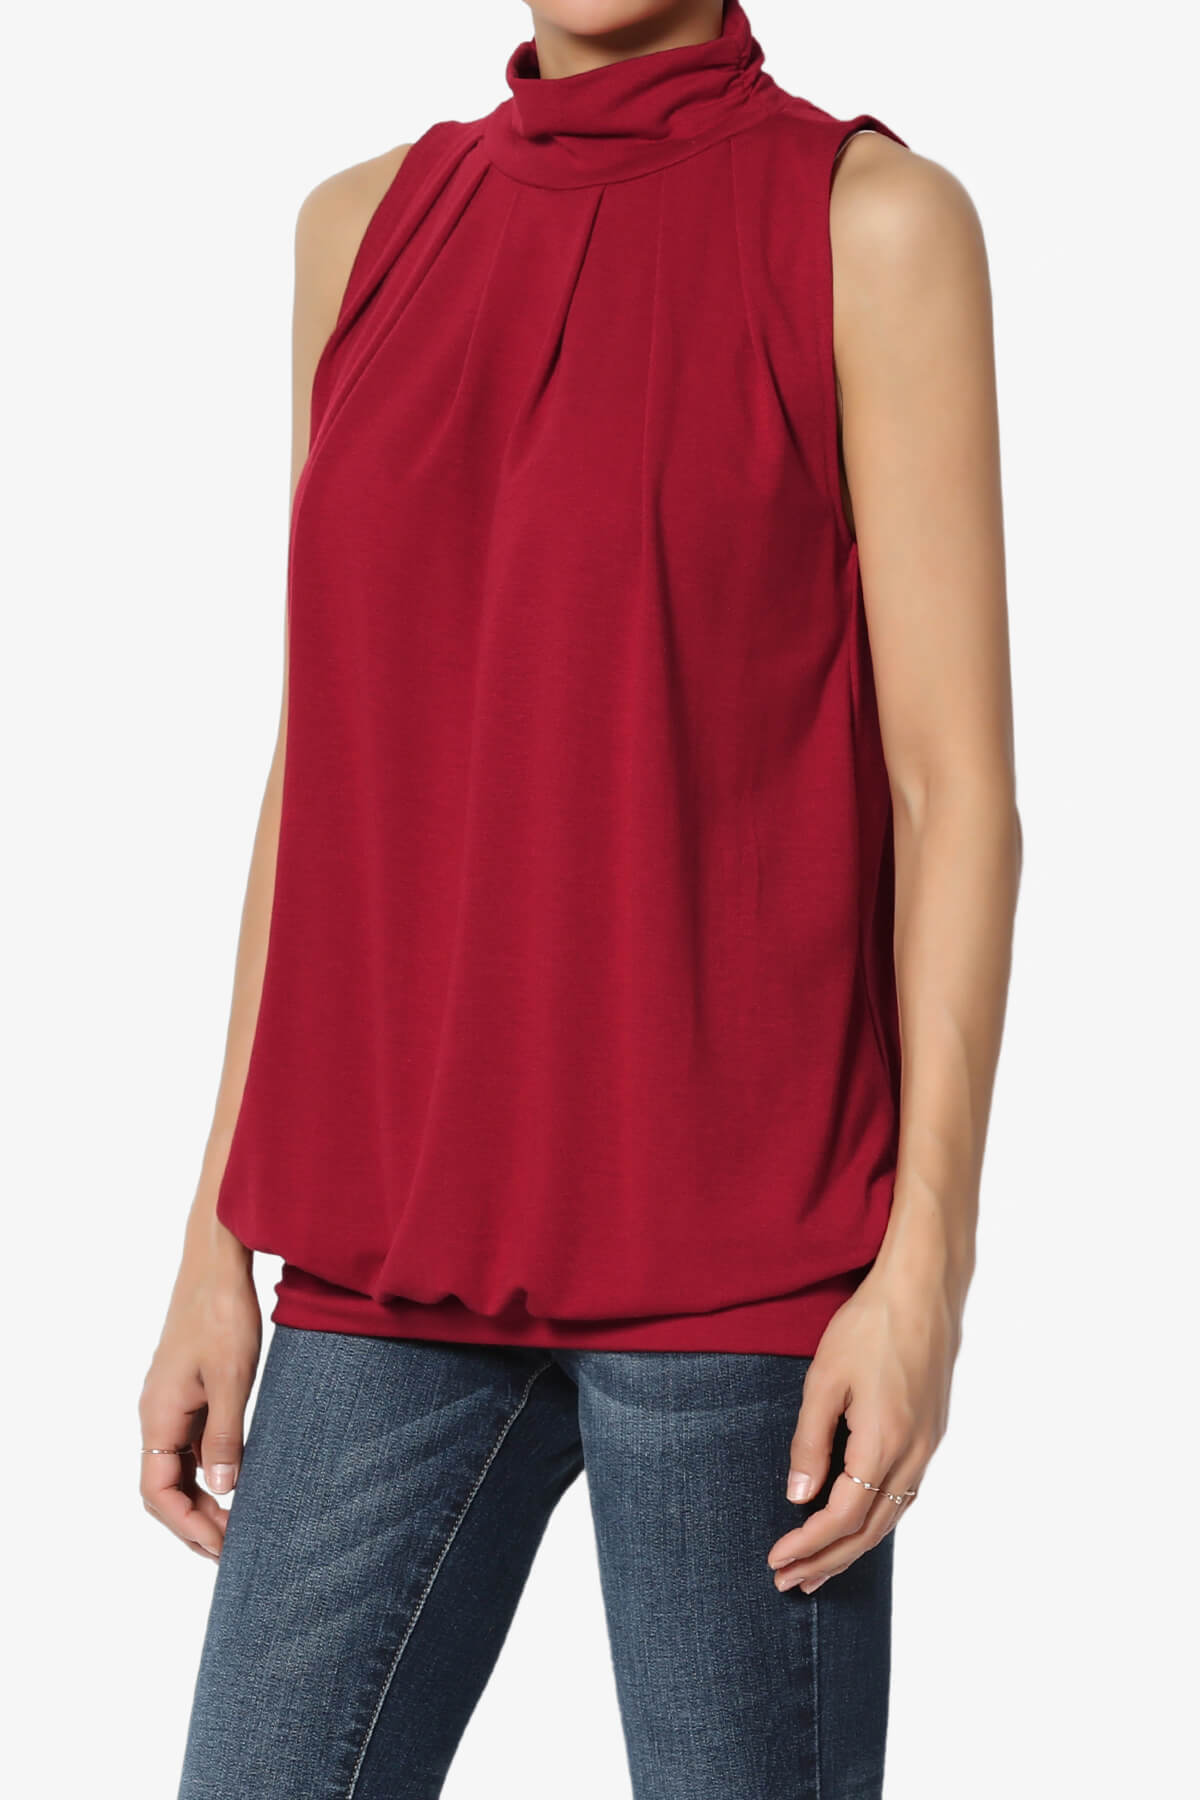 Load image into Gallery viewer, Jibbitz Sleeveless Mock Neck Pleated Top BURGUNDY_3
